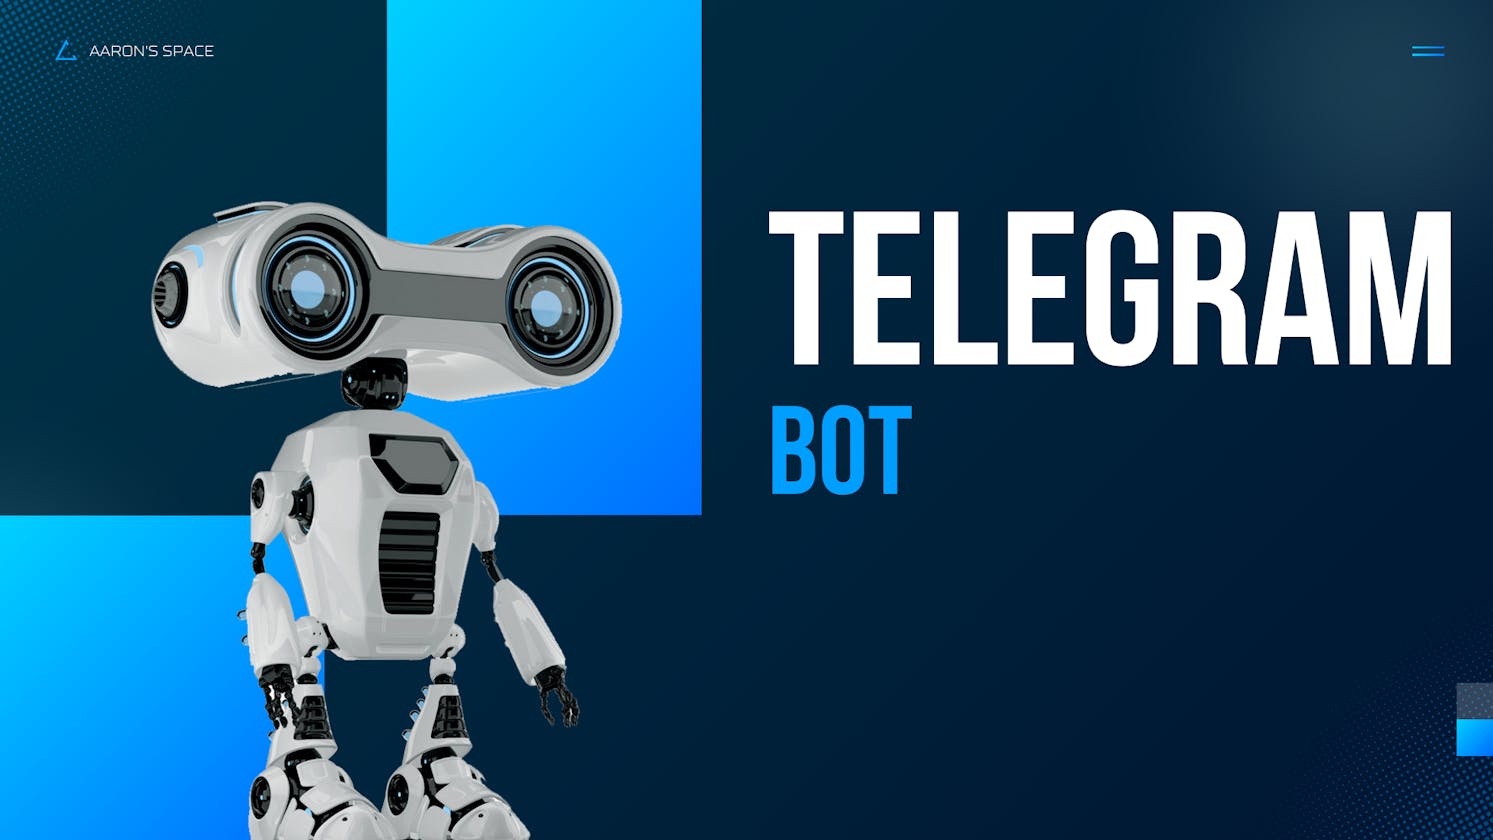 Find out how to build a Telegram Bot using python